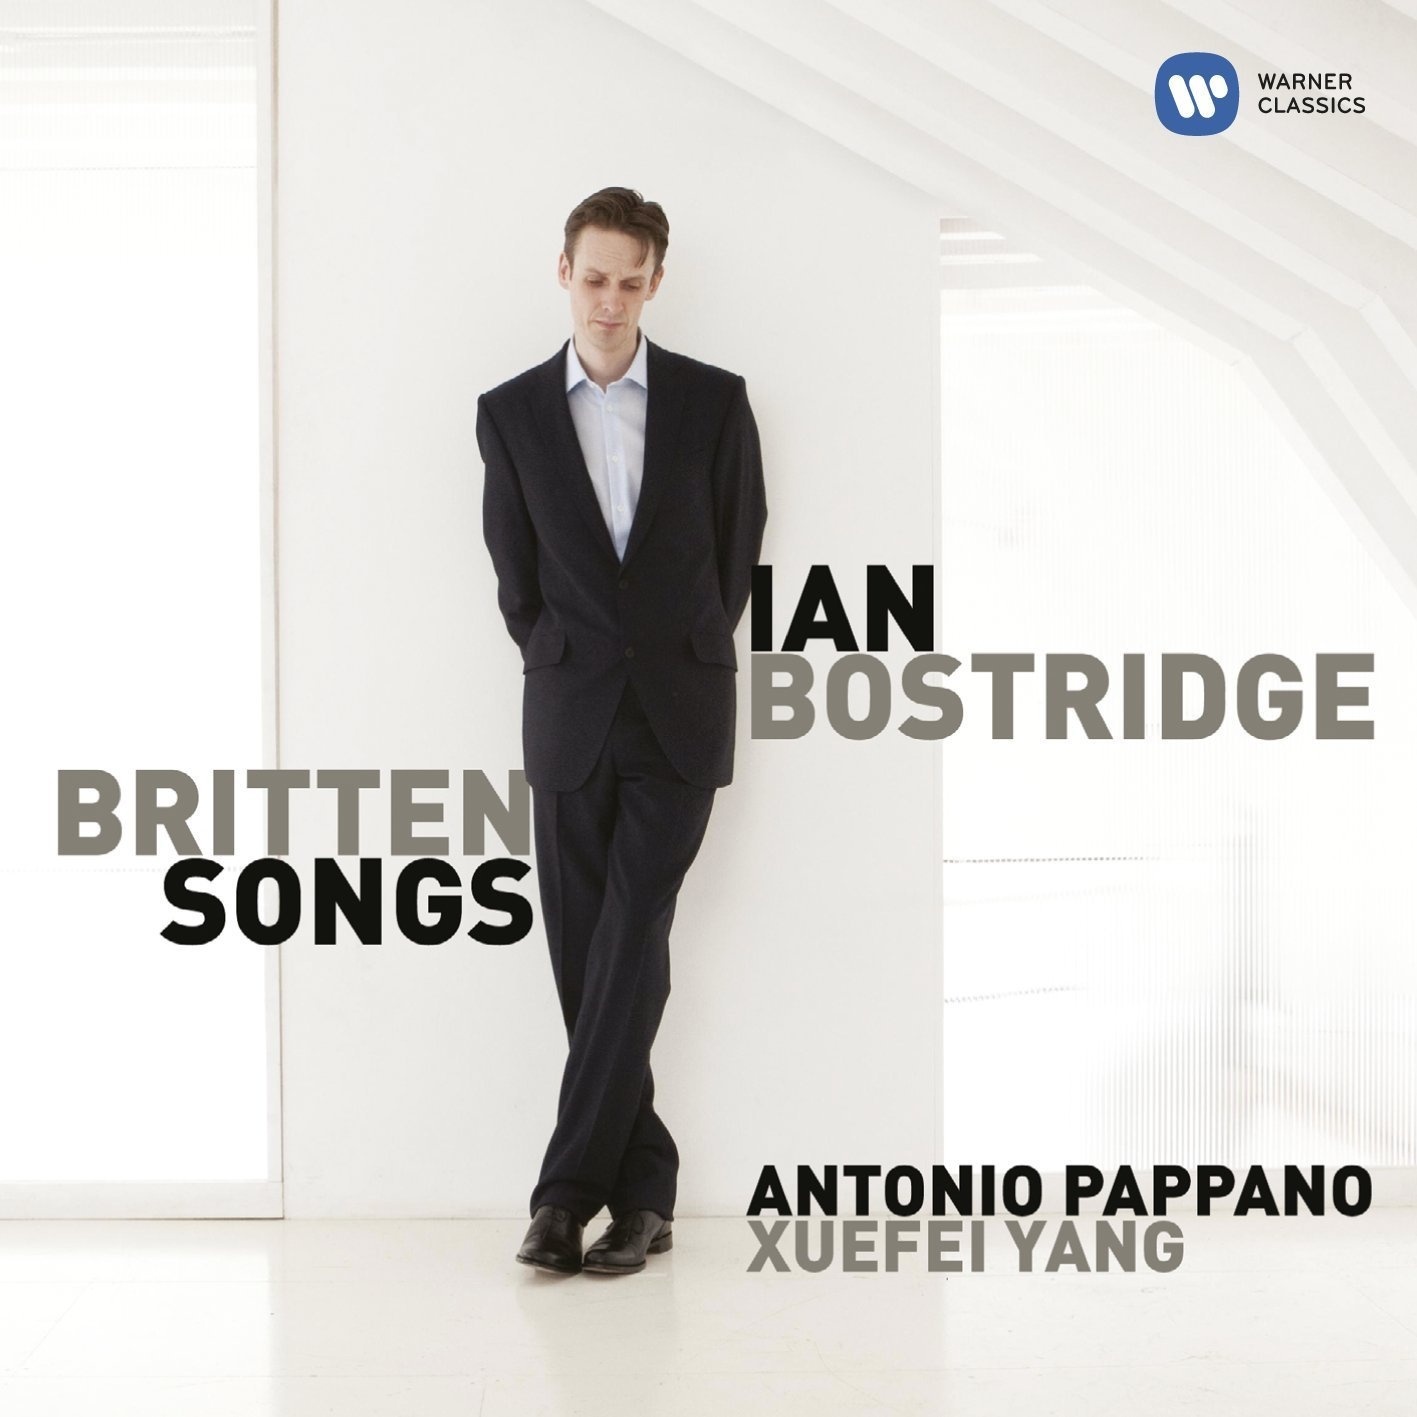 Benjamin Britten: Songs from the Chinese Op. 58 - Dance Song (fom the Book of Songs)